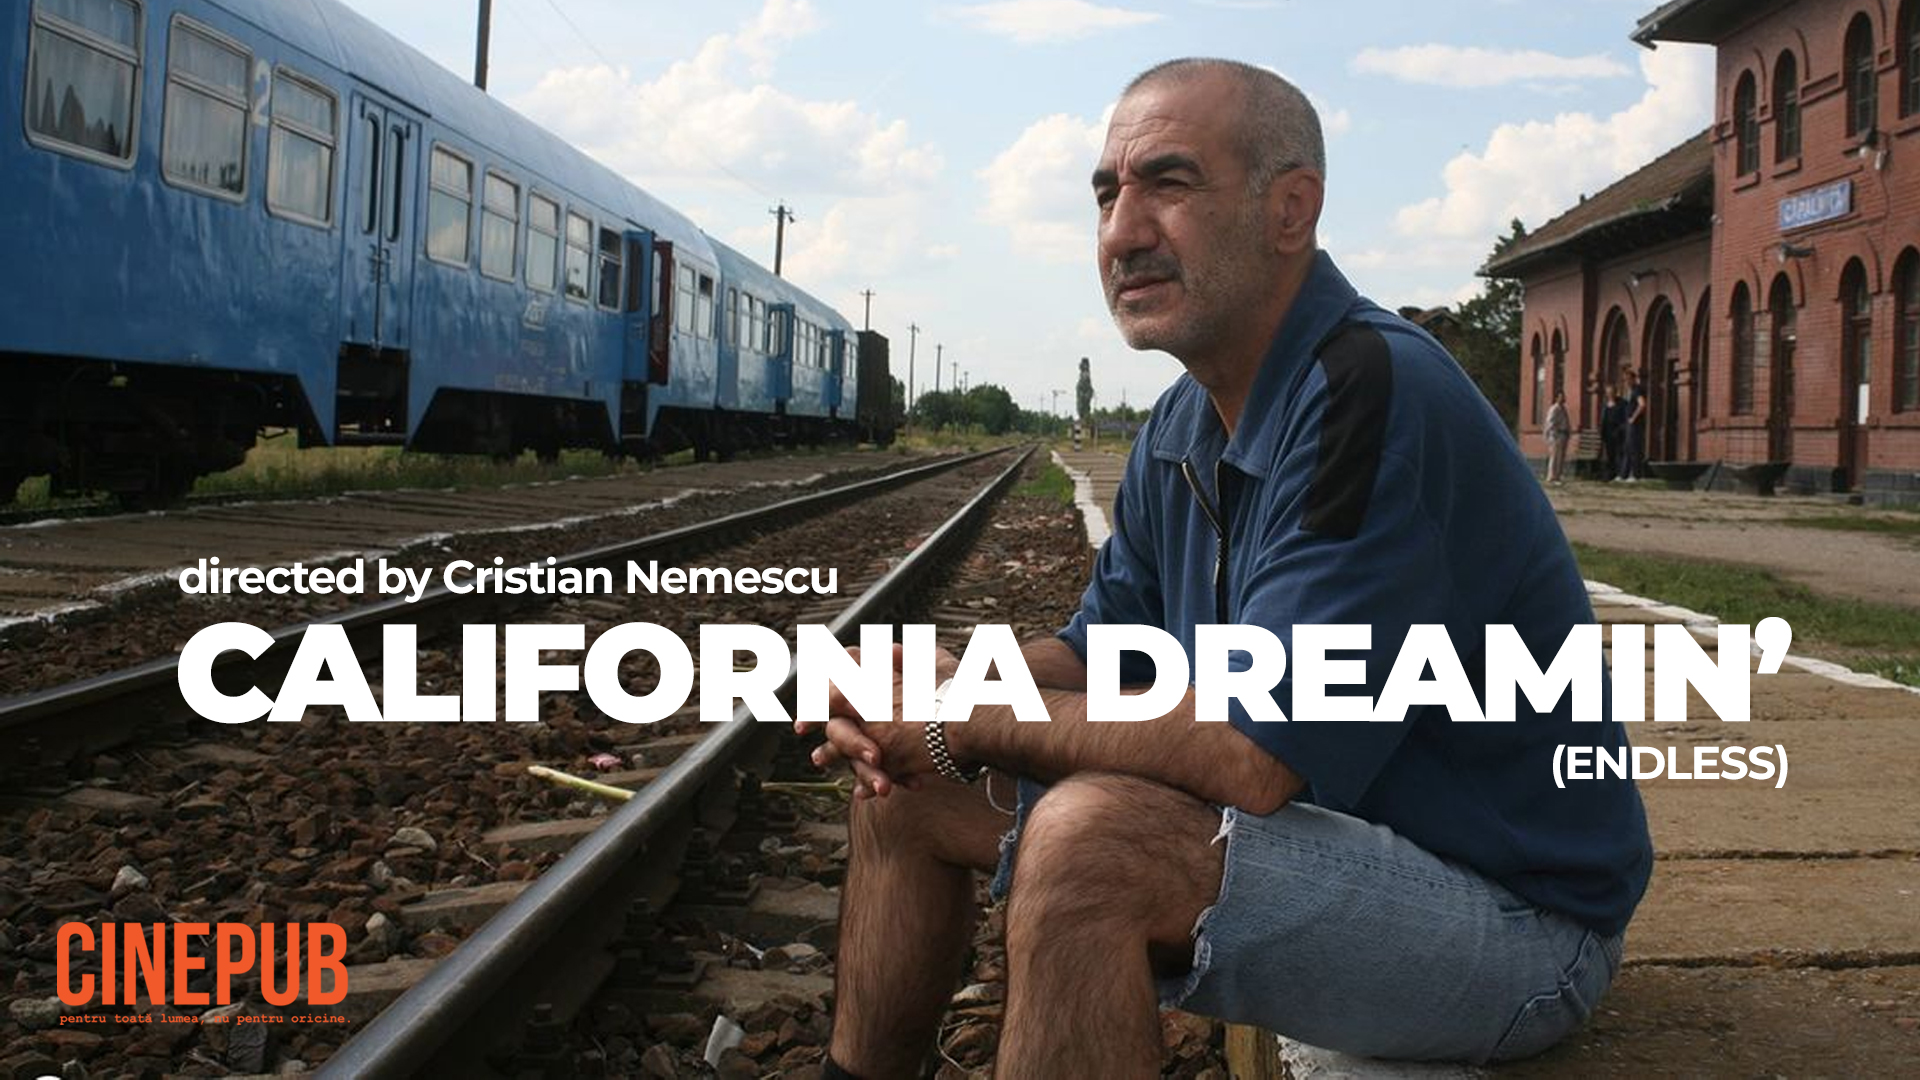 California Dreaming - directed by Cristian Nemescu - online movie on CINEPUB